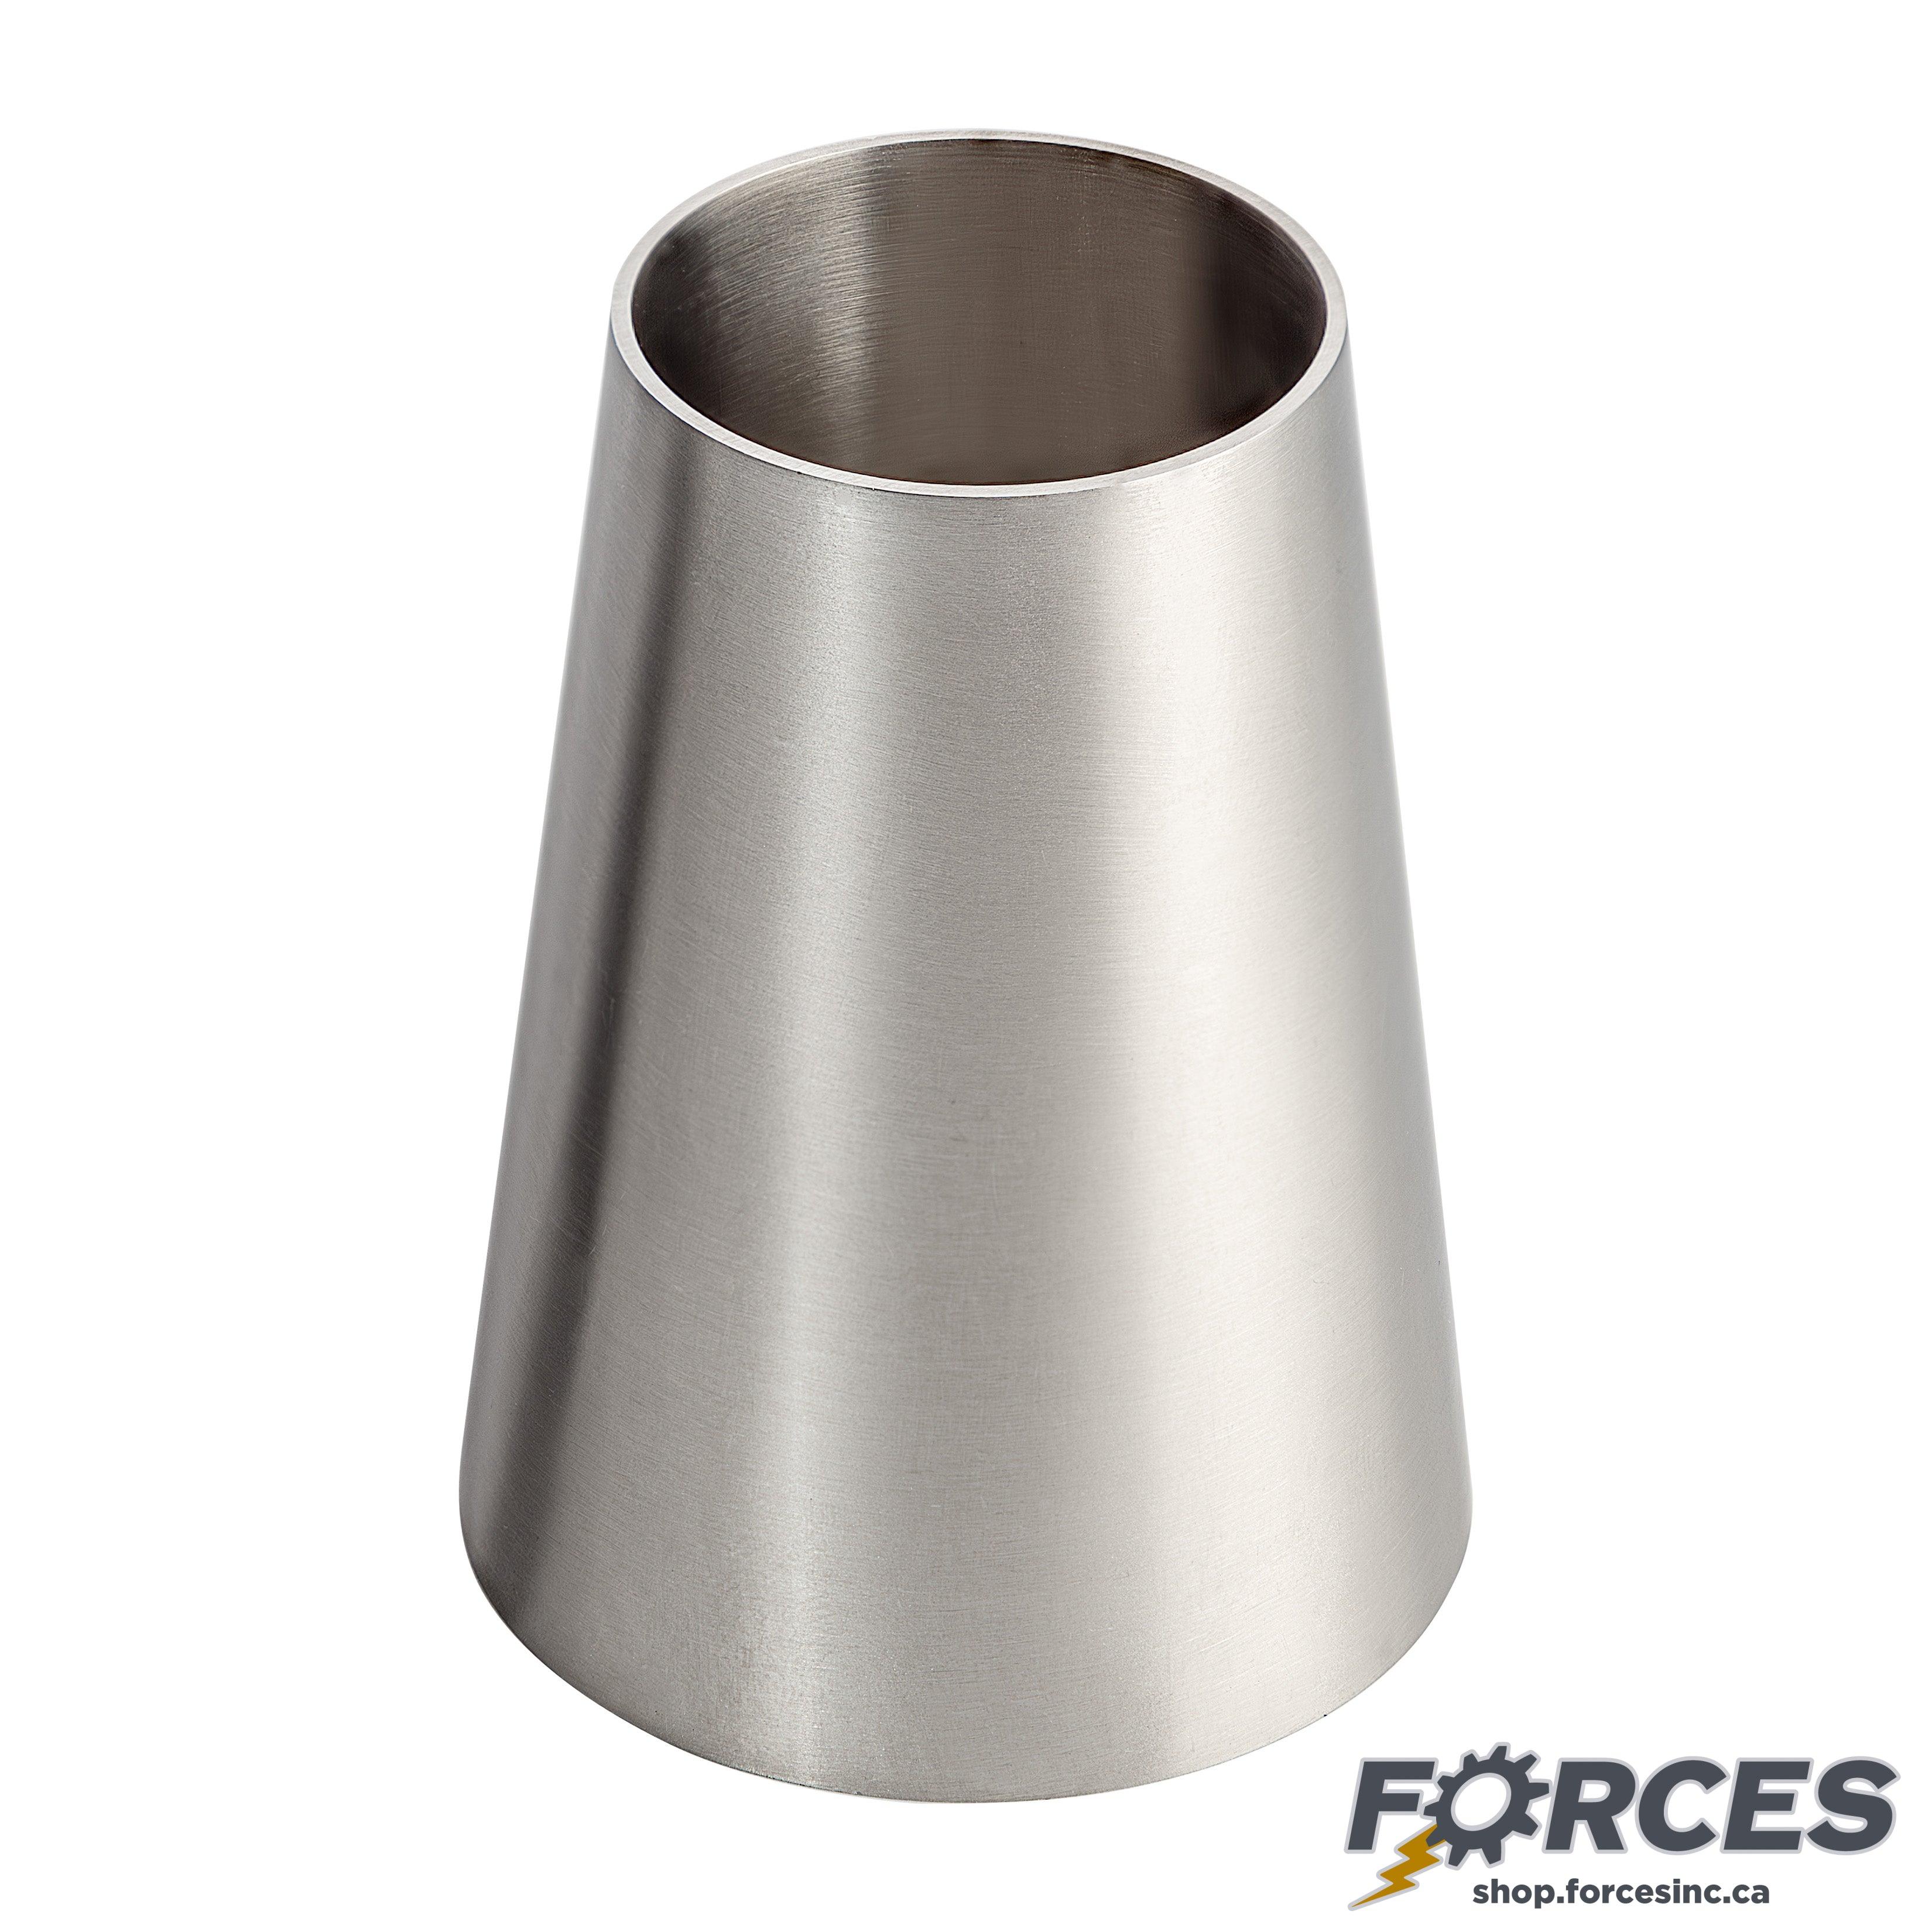 2-1/2" x 2" Butt Weld Concentric Reducer - Stainless Steel 304 - Forces Inc